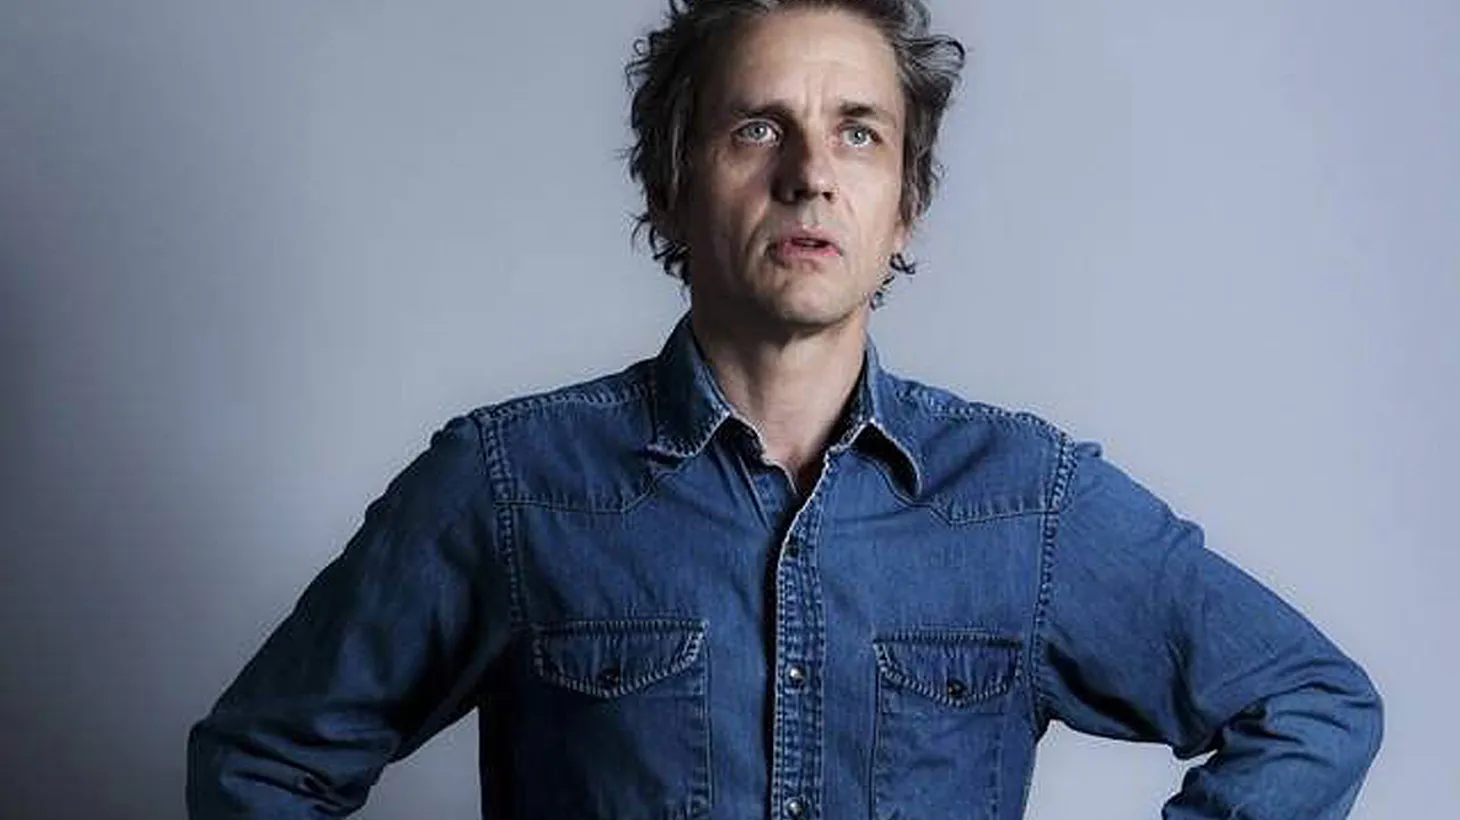 Dean Wareham made his mark as the singer of influential rock band Galaxie 500, followed by successful creative stints in the band Luna and with his wife Britta.